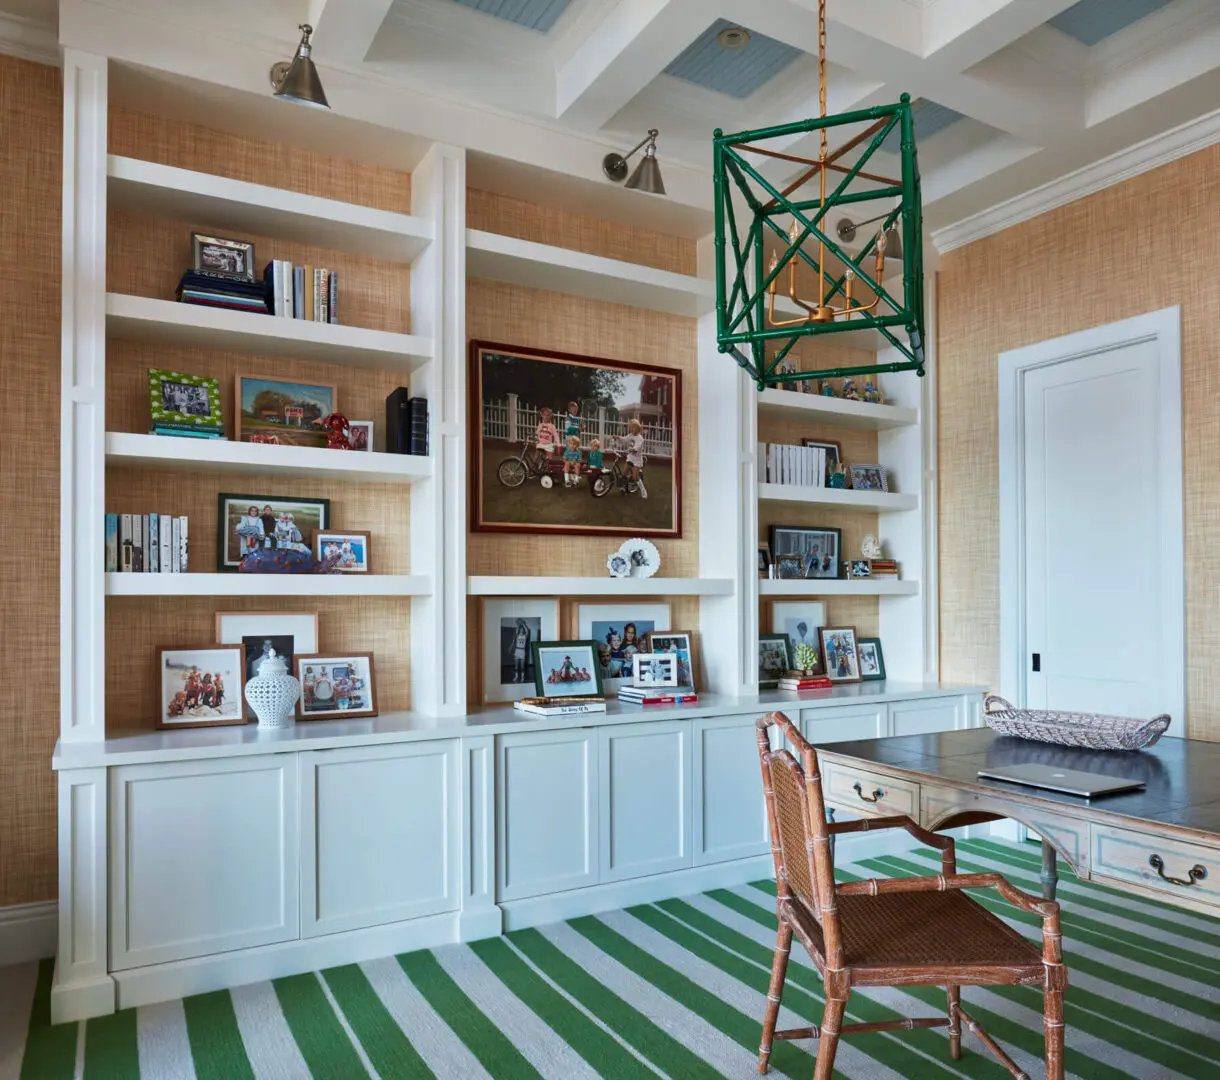 A room with green and white striped floors, shelves and a table.